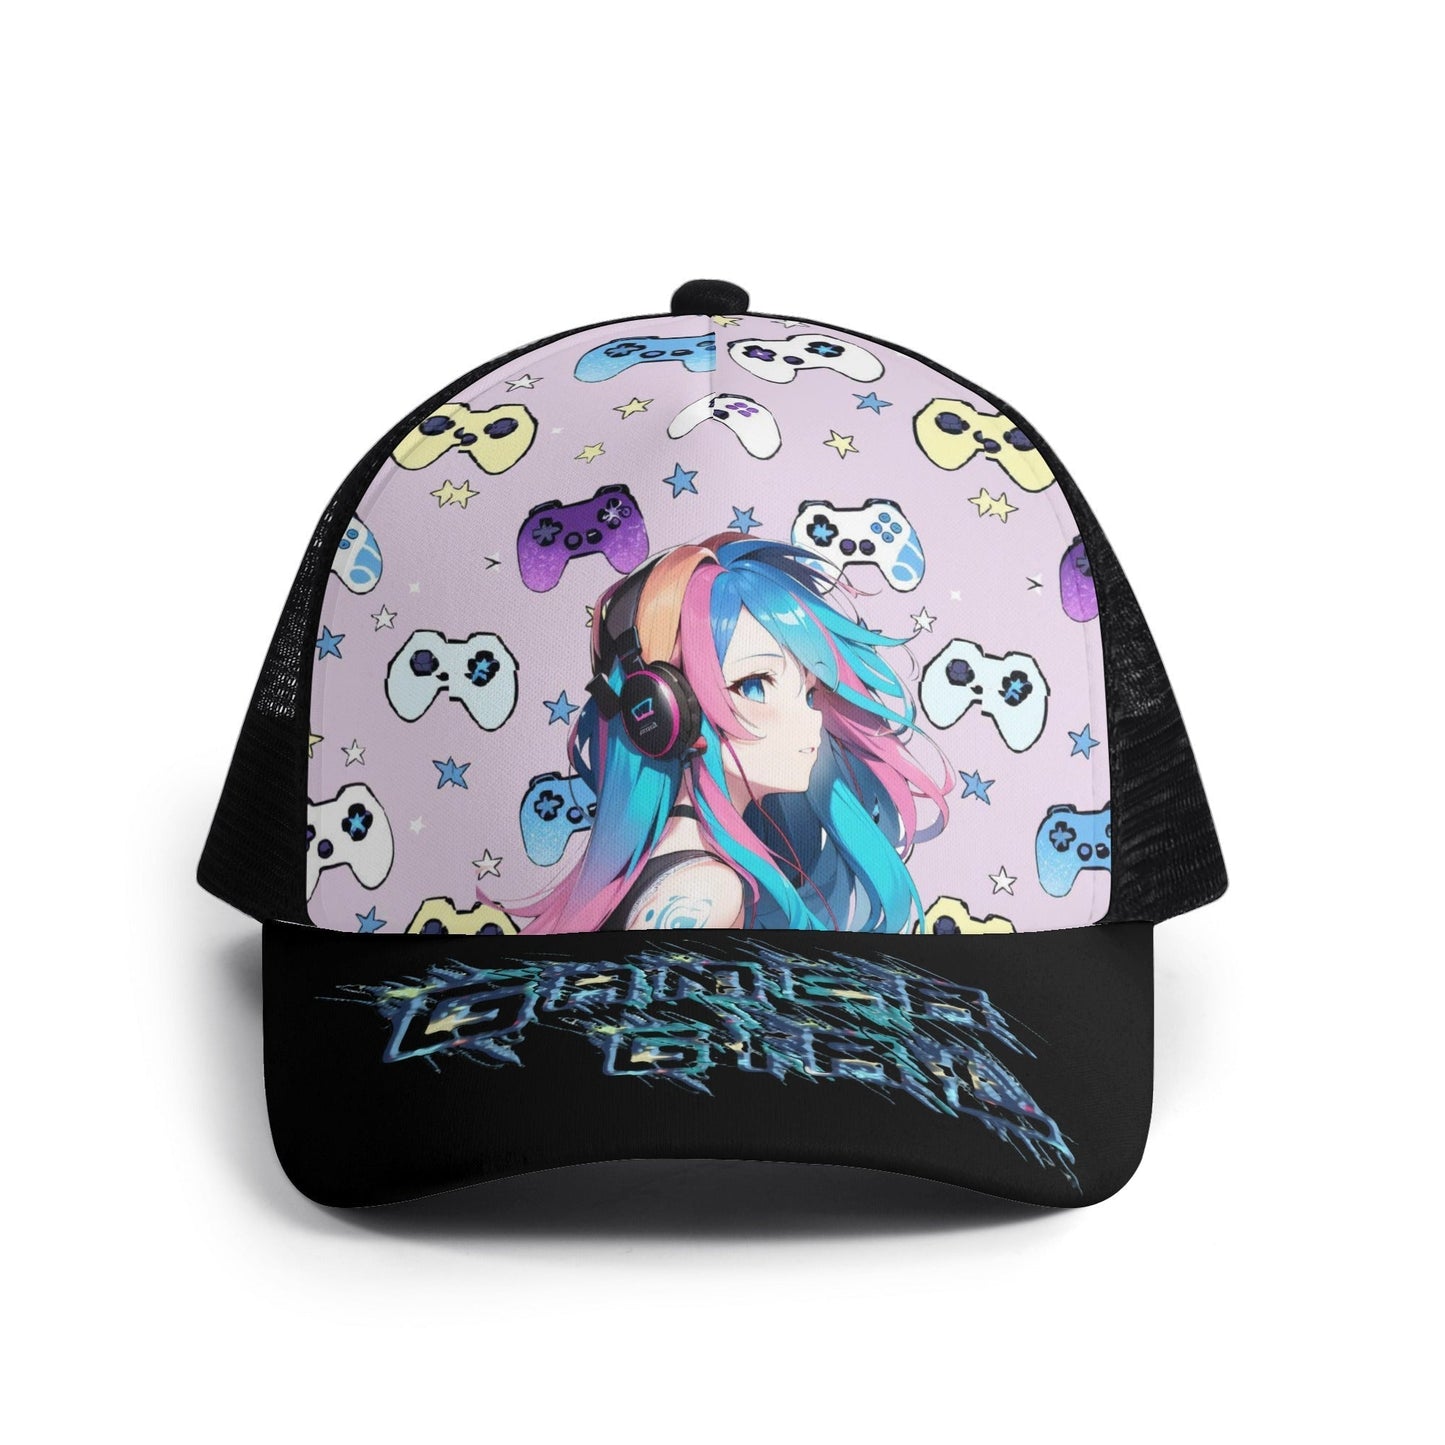 Stand out  with the  Gamer Girl Kids Mesh Baseball Caps  available at Hey Nugget. Grab yours today!